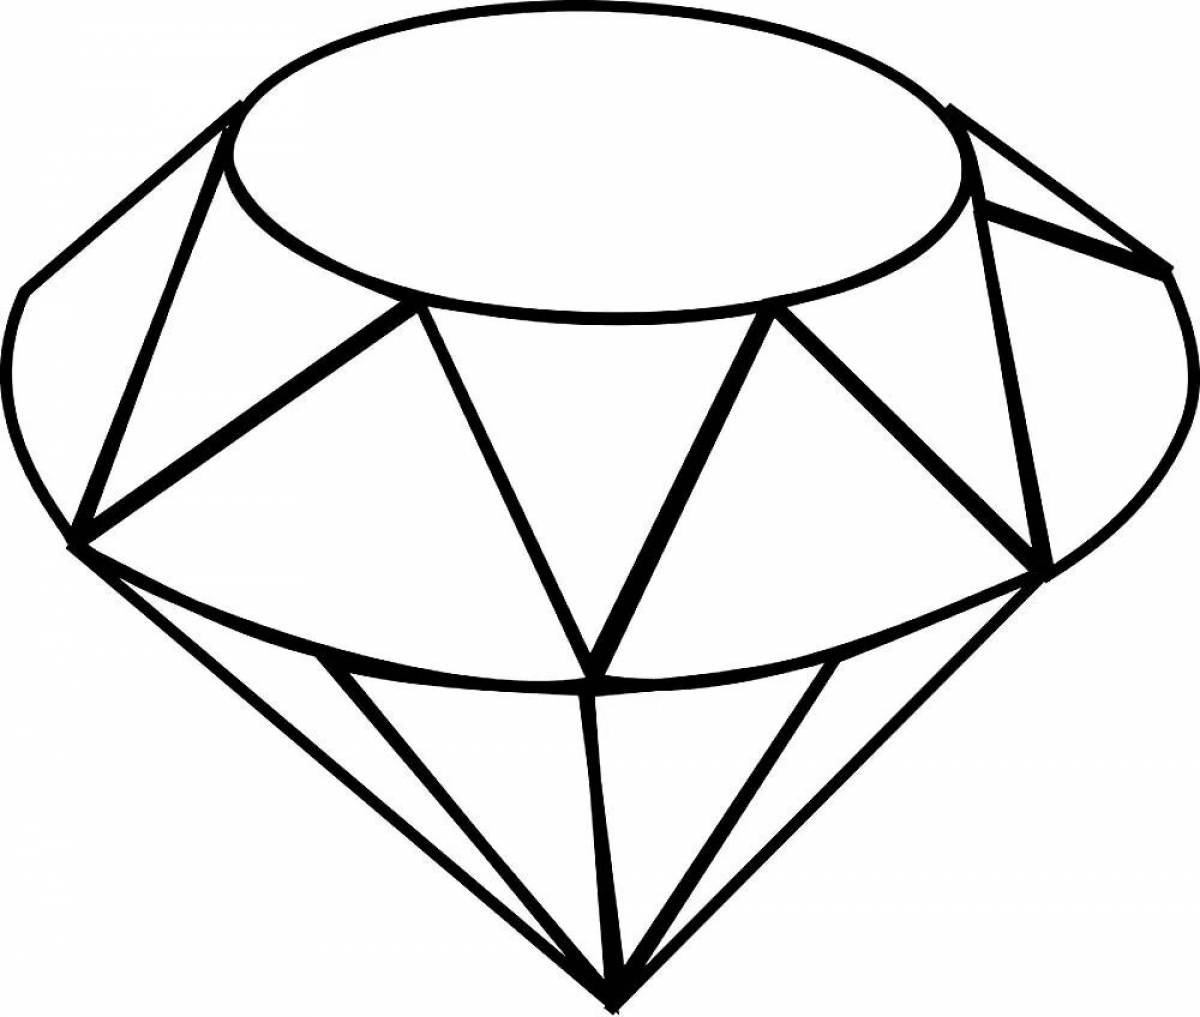 Exalted diamond coloring page for kids